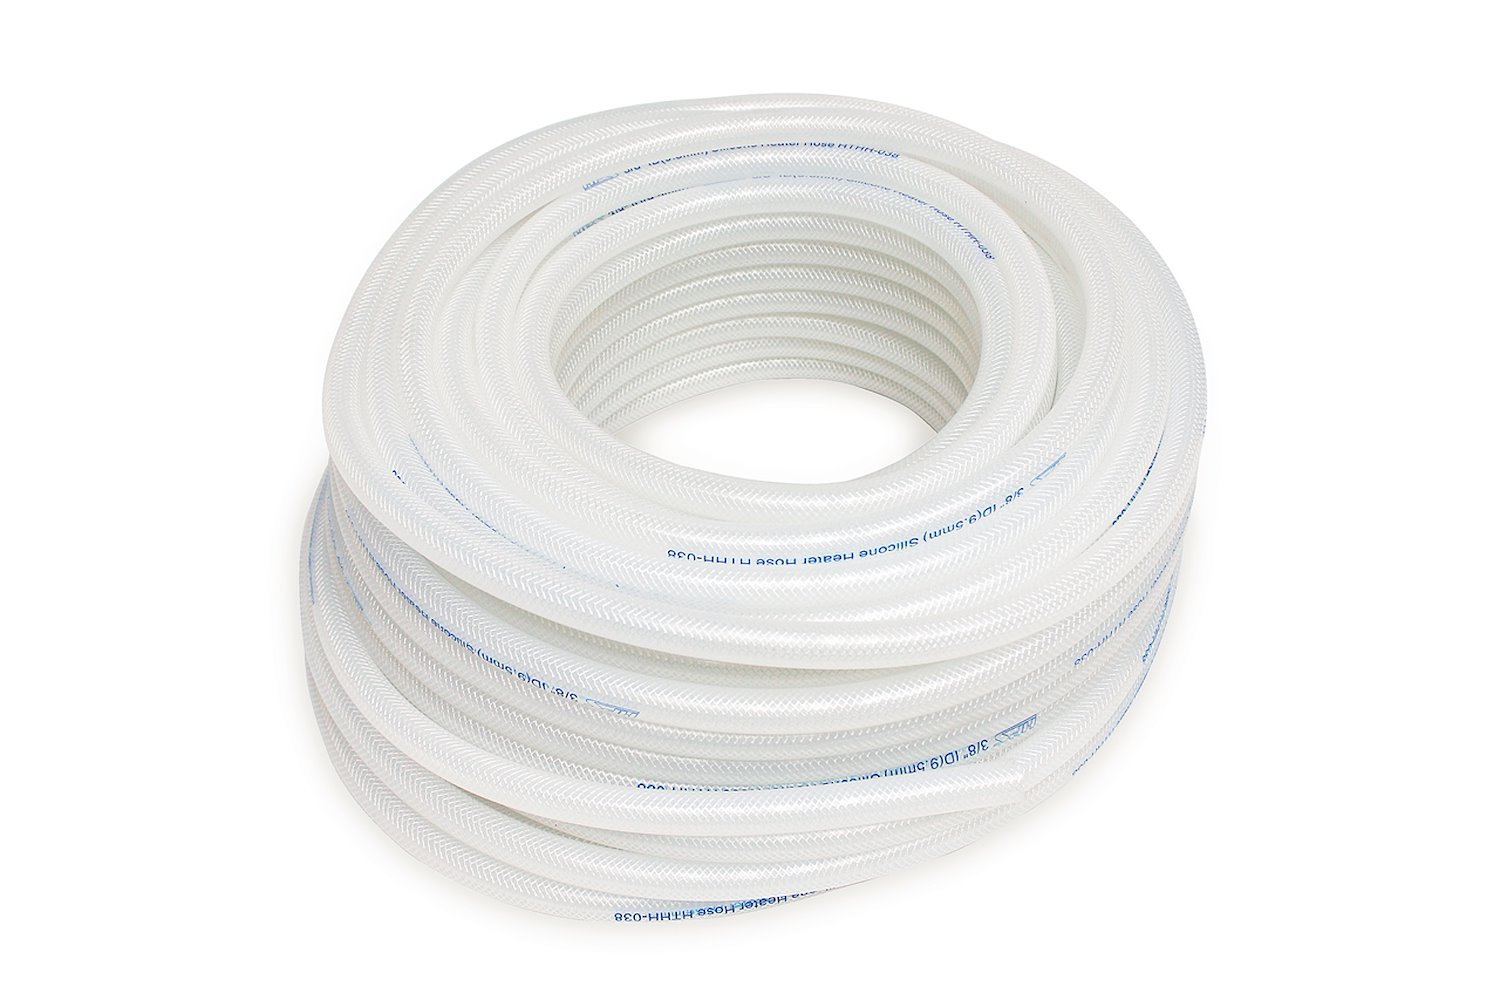 HTHH-075-CLEARx100 Silicone Heater Hose Tubing, High-Temp Reinforced, 3/4 in. ID, 100 ft. Roll, Clear